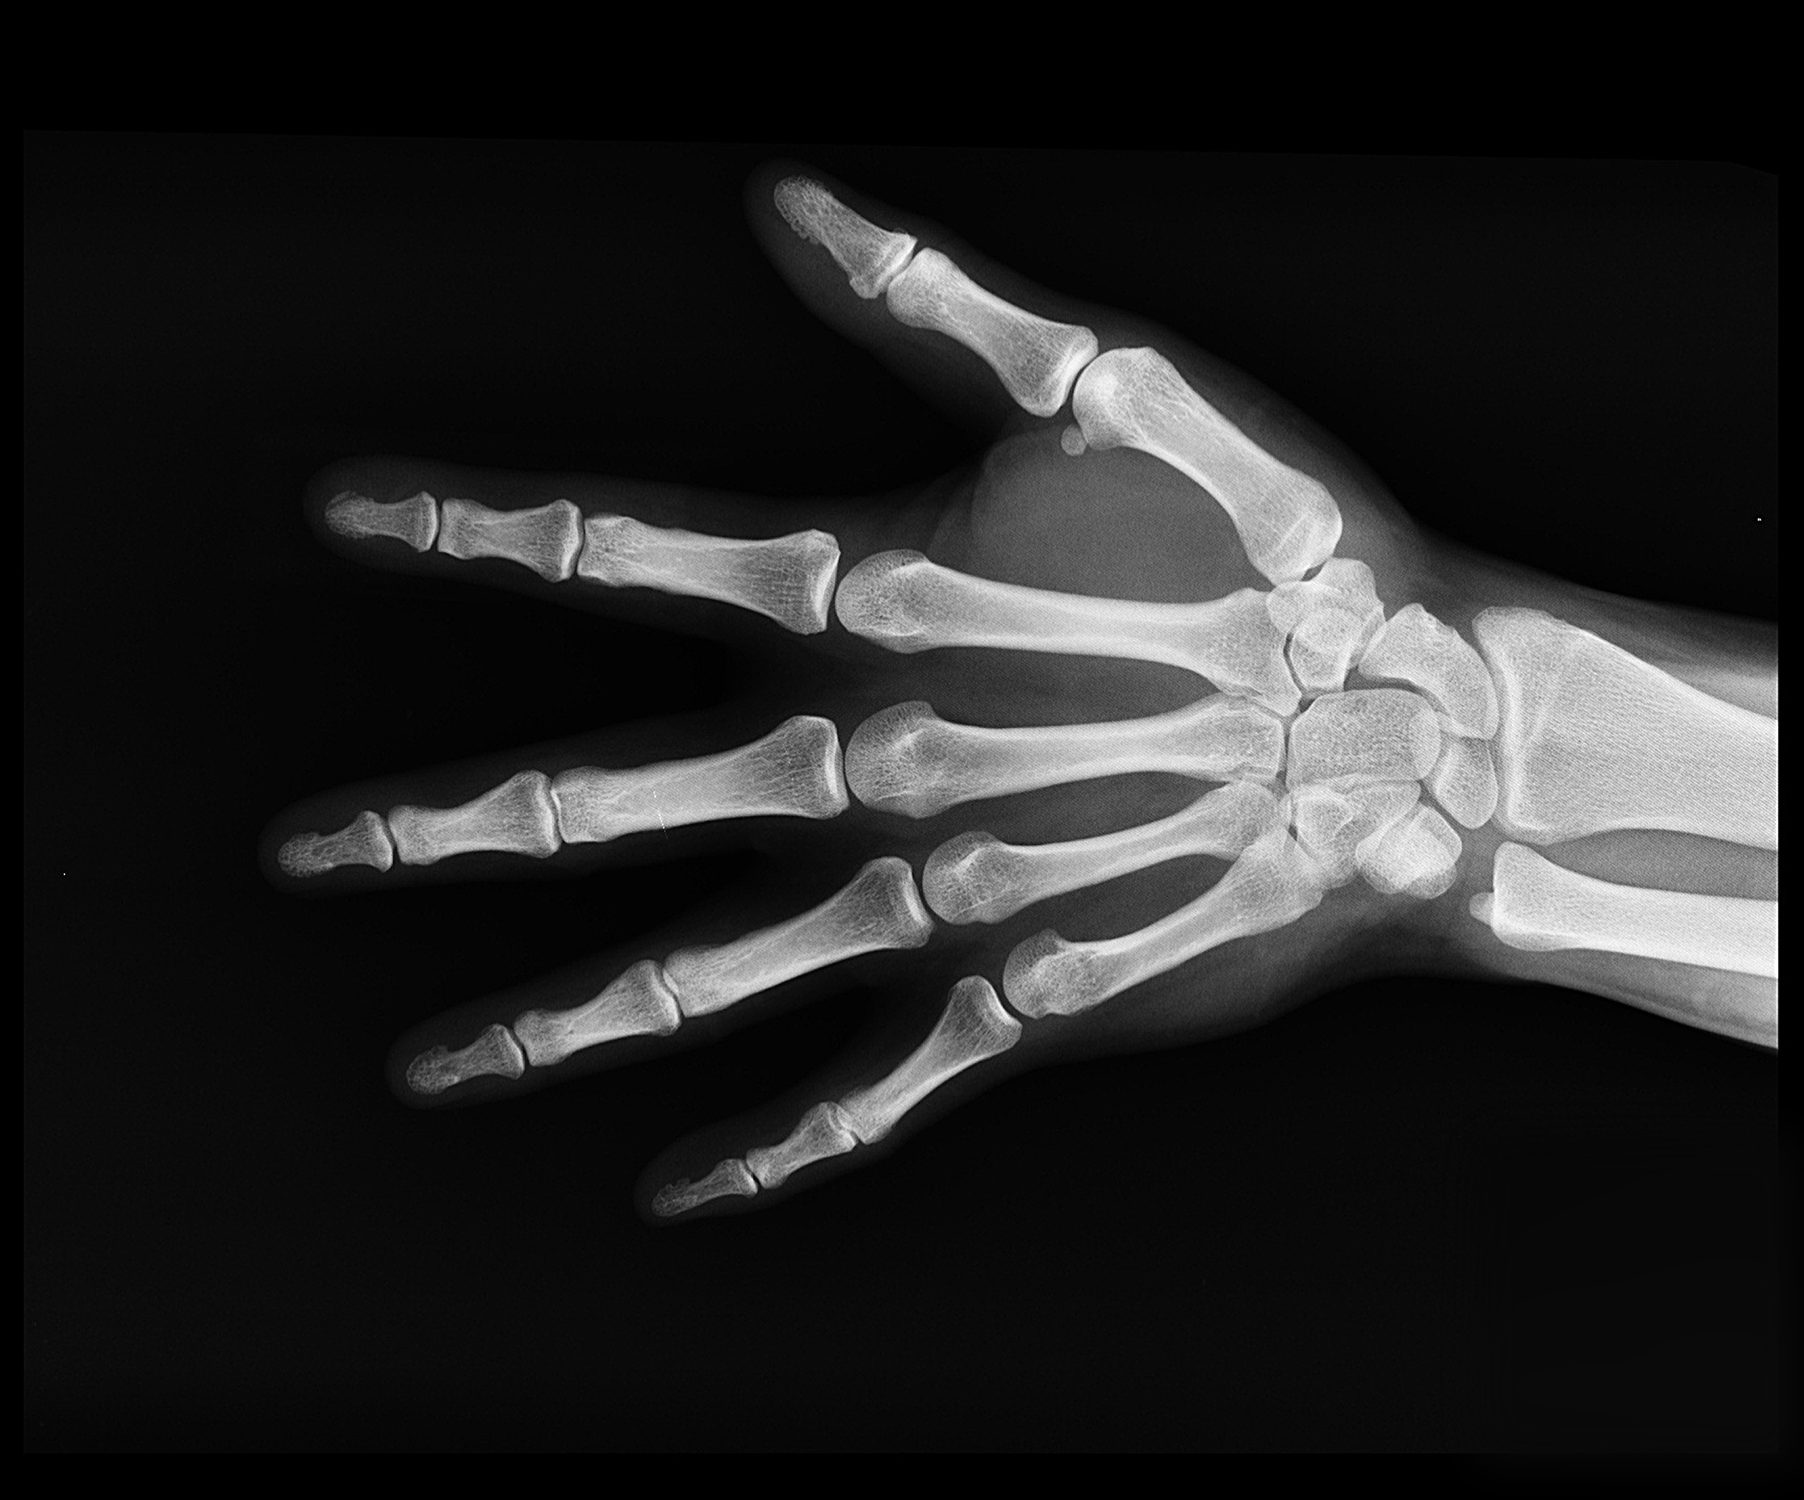 Facts You May Not Have Known About X-Rays - Seton Imaging